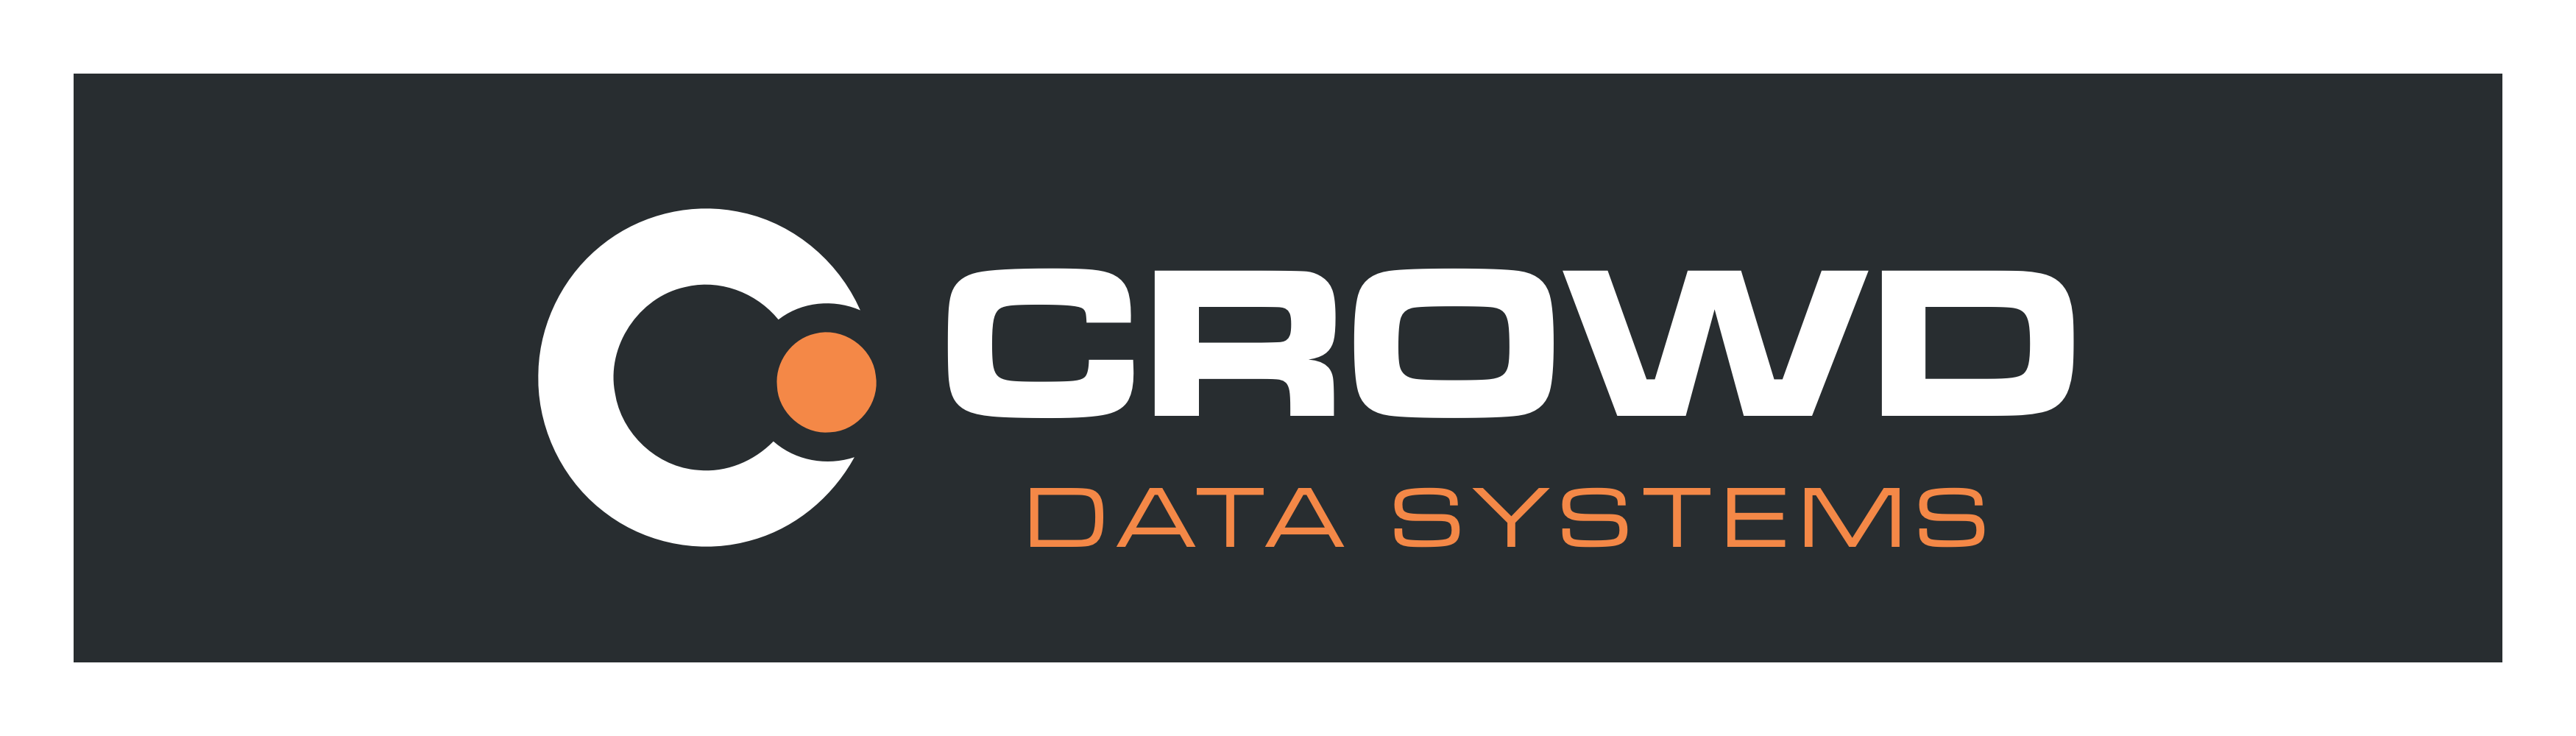 Crowd Data Systems